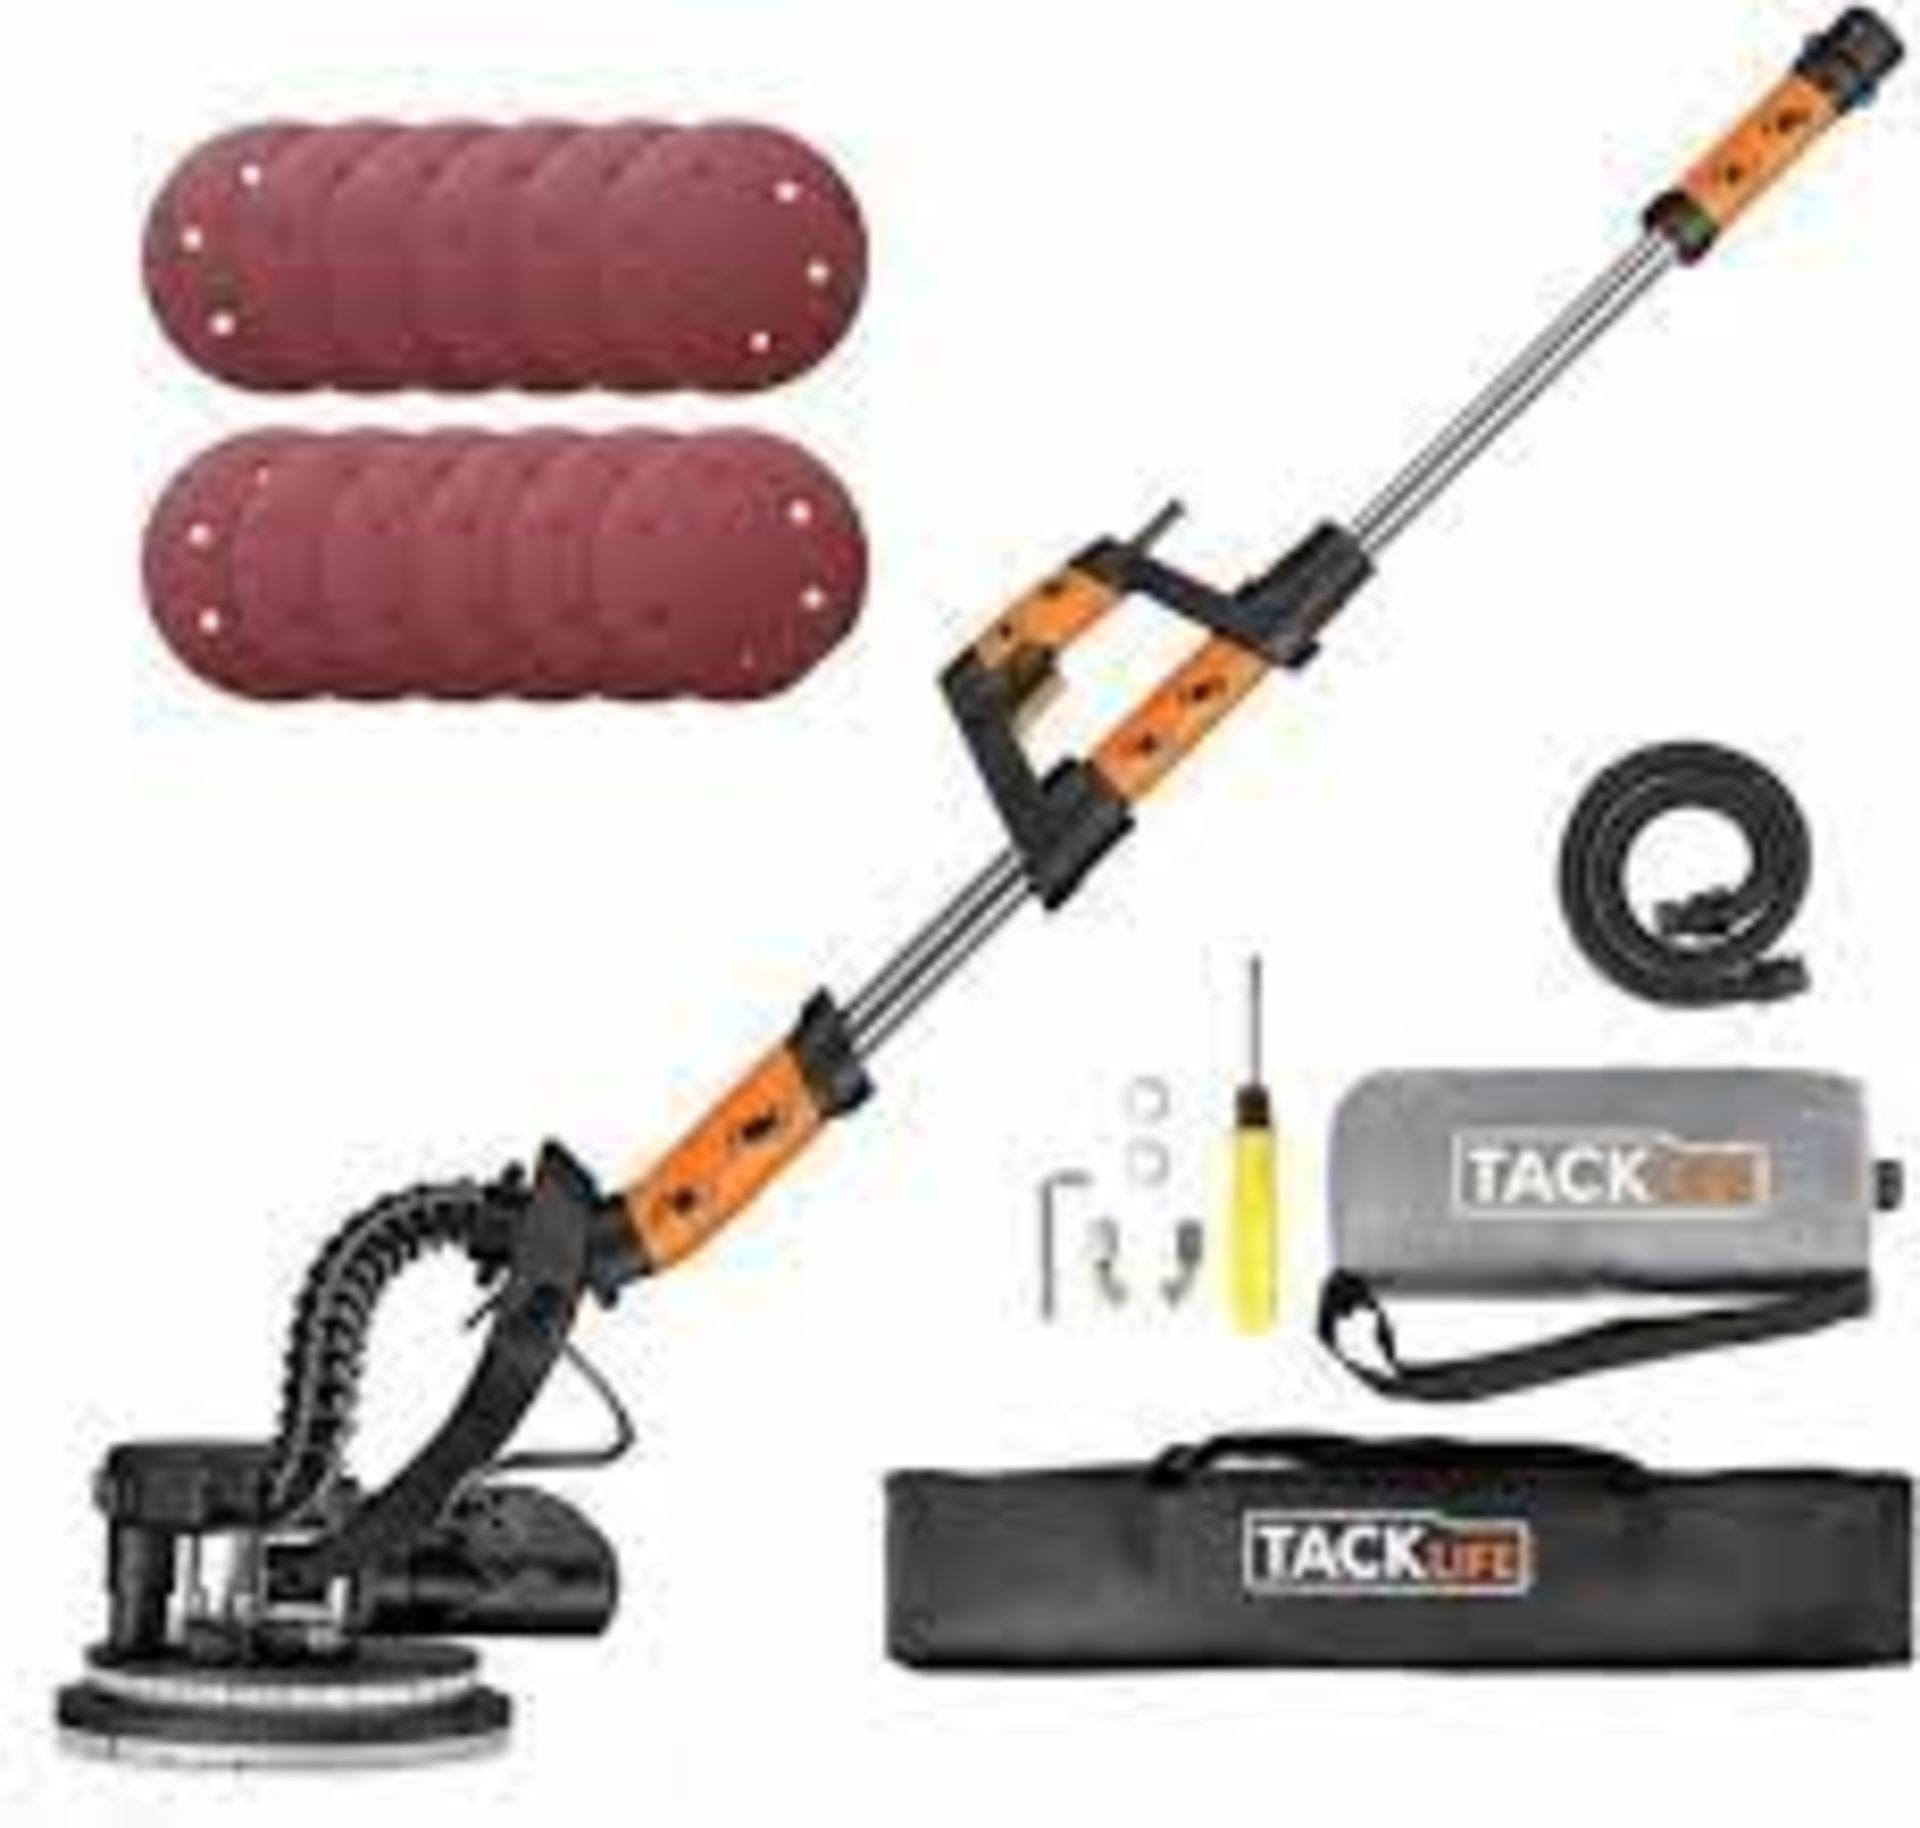 NEW BOXED Tacklife PDS03A Drywall Sander. ?Vacuum Cleaner Adapter?Automatic vacuum dust collection